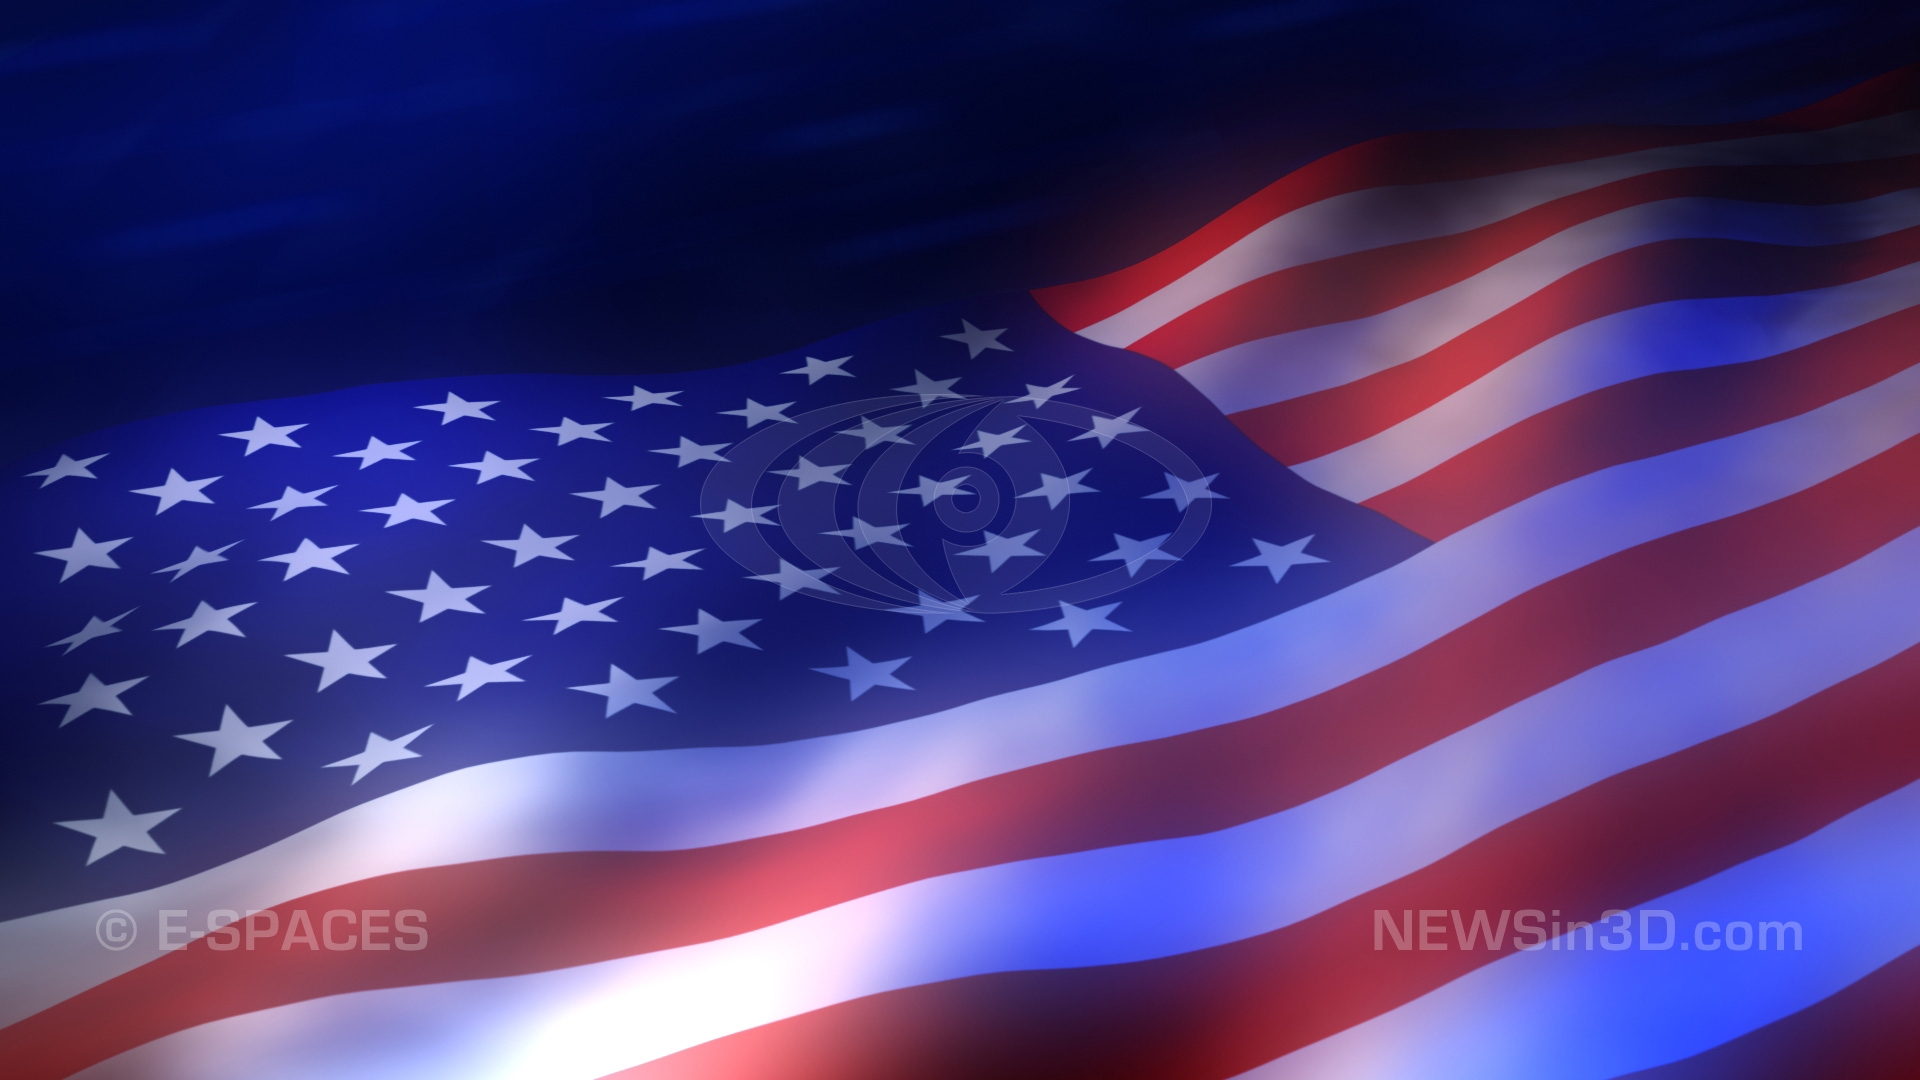 Flag Backgrounds Background Presidential American Election wallpapers 1920x1080